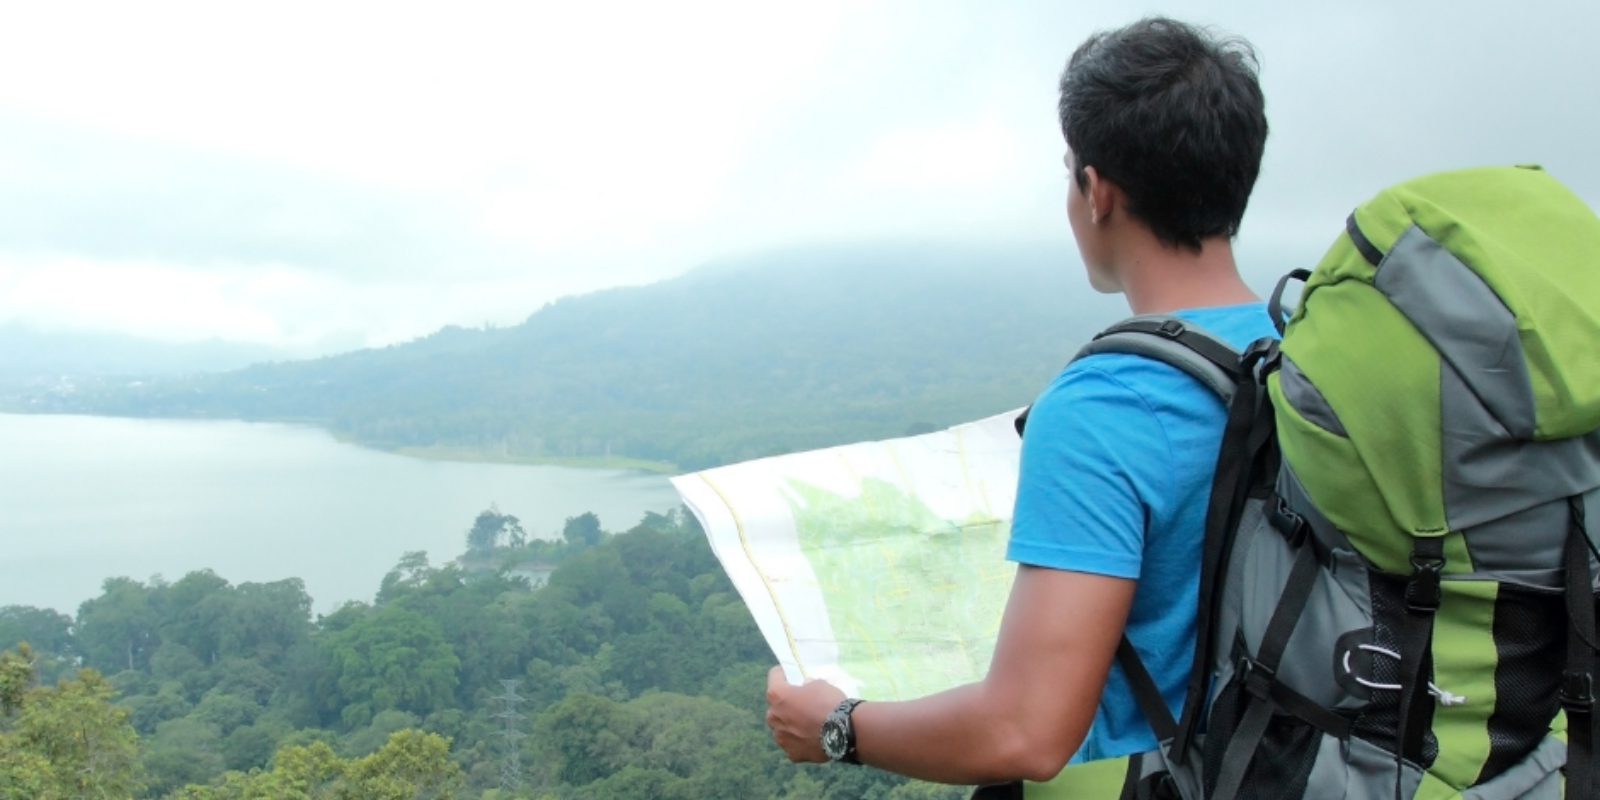 A traveler with a backpack is looking at a map with a scenic lake and lush hills in the background.